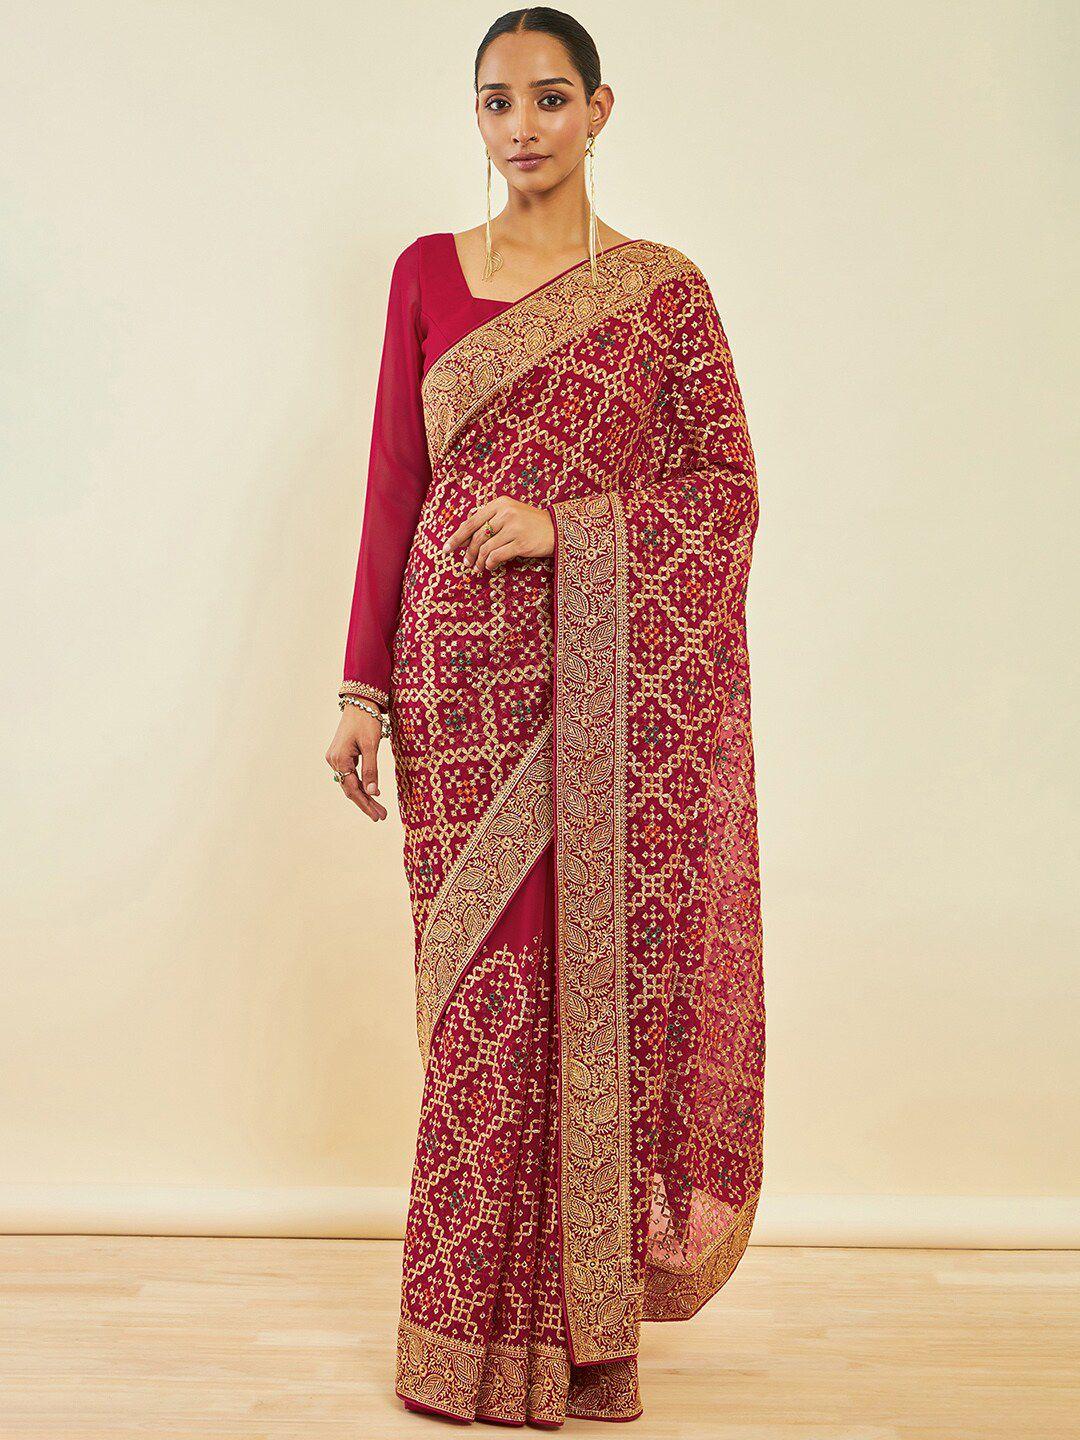 soch-maroon-&-gold-toned-ethnic-motifs-embroidered-poly-georgette-saree